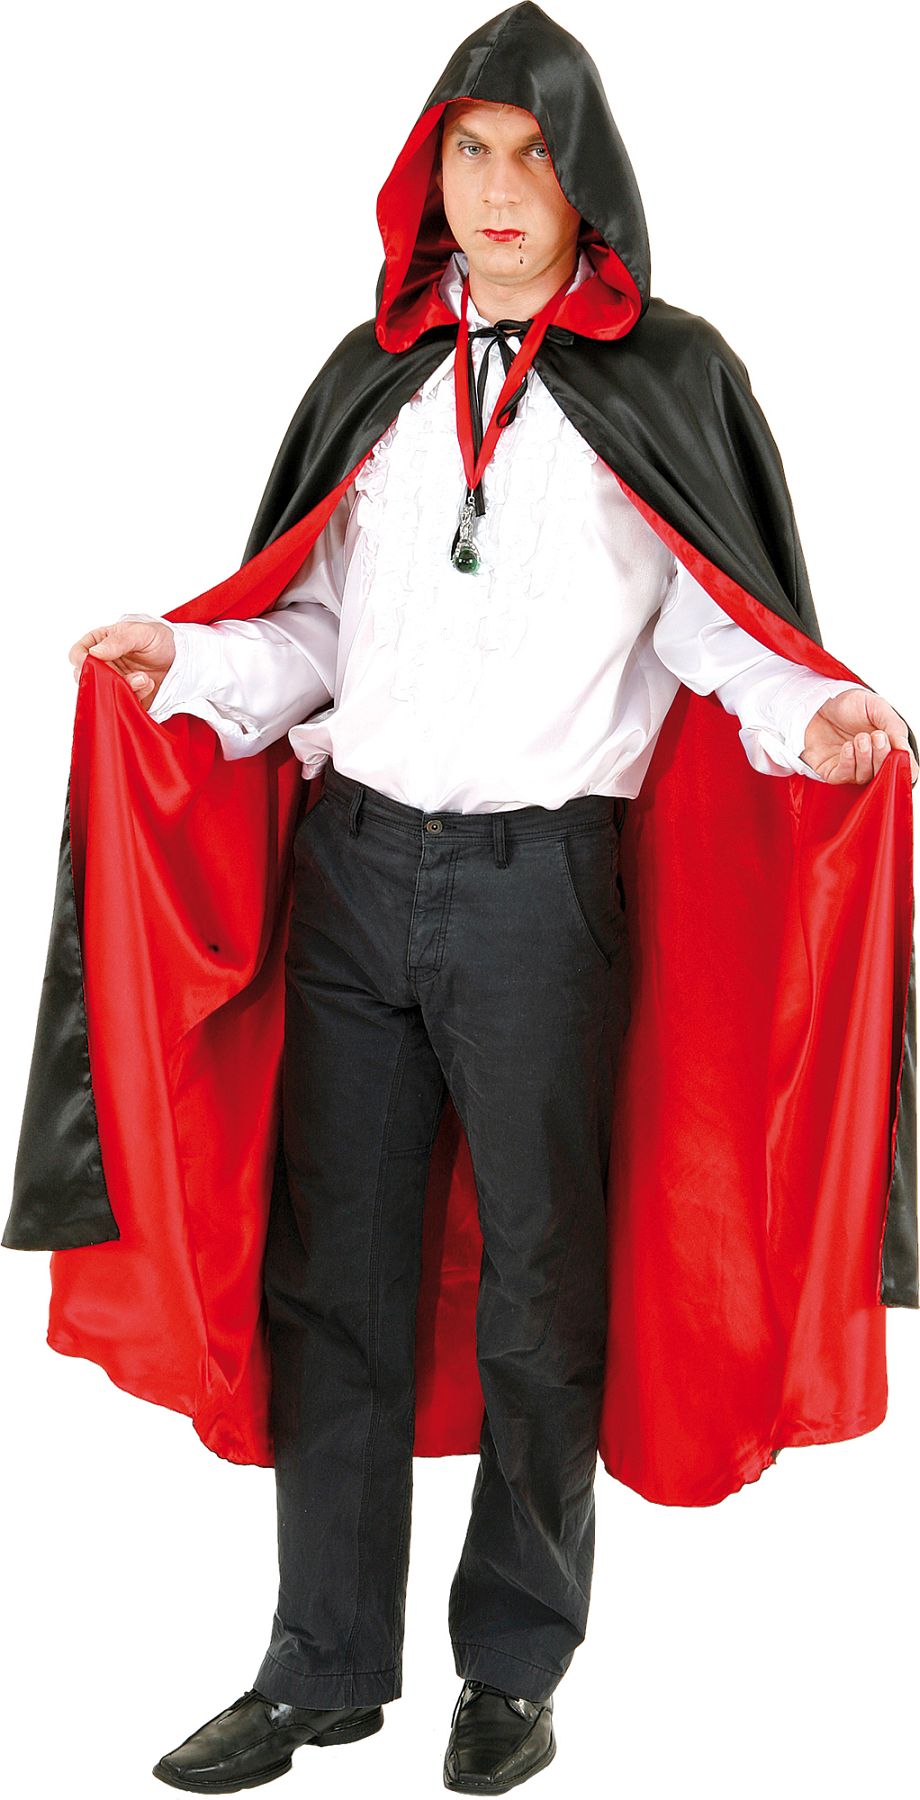 Reversible cape with hood, black/red